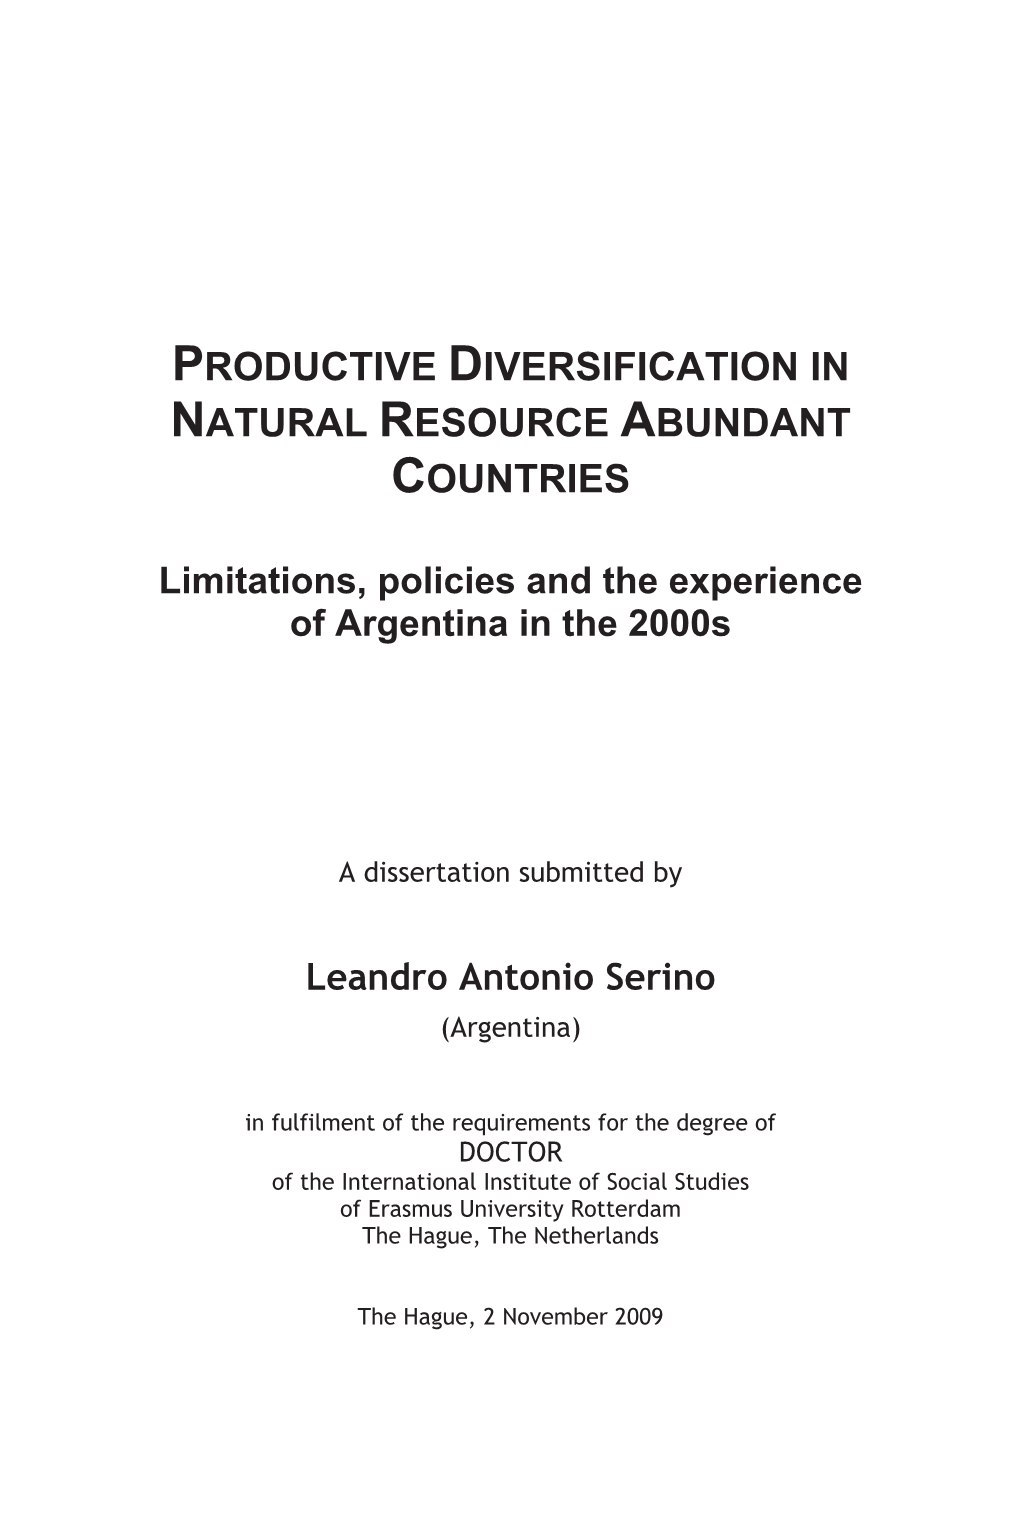 Productive Diversification in Natural Resource Abundant Countries